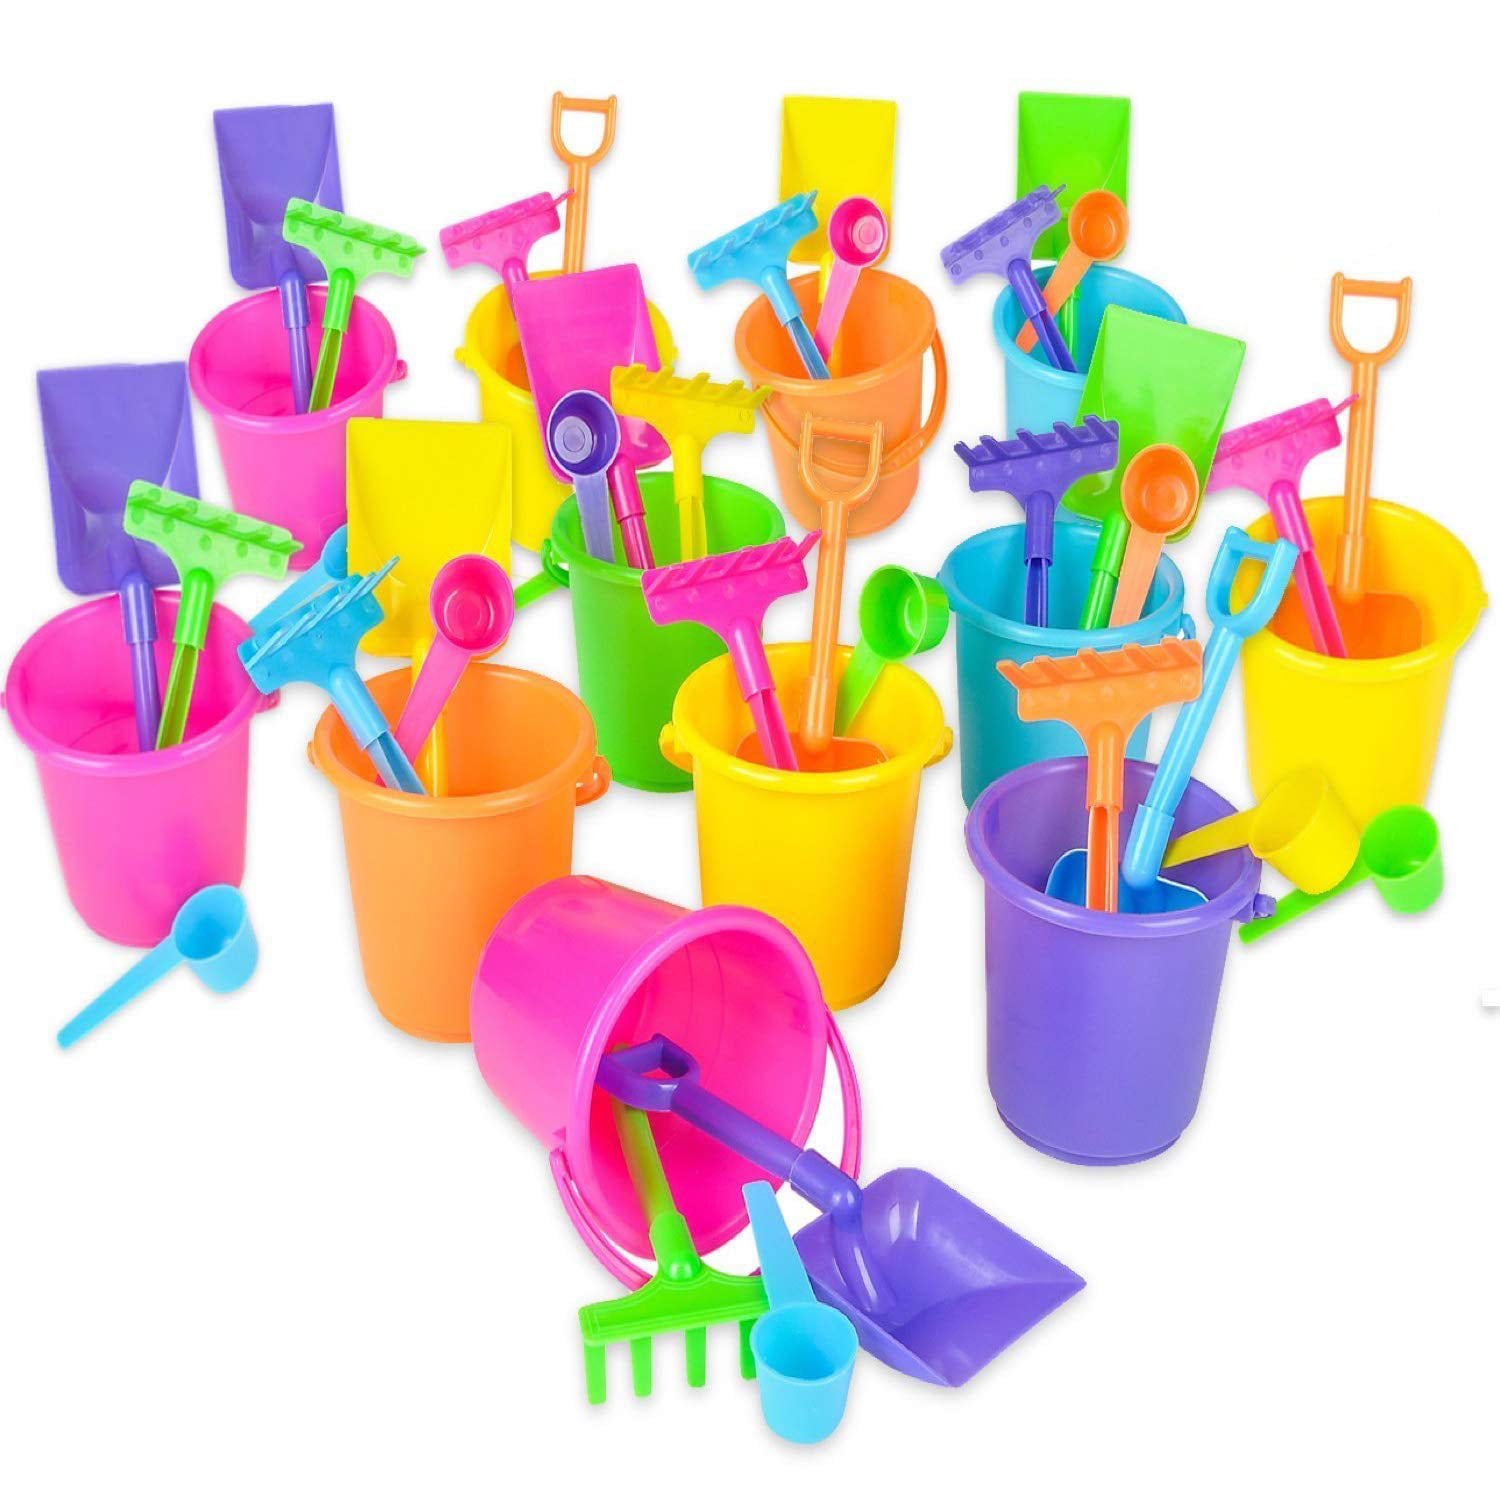 Play Set Includes 1 Sand Bucket 1 Rake 6-Pack and 1 Scoop The Dreidel Company Mini Beach Playsets 1 Shovel Party Favors for Kids and Toddlers Birthday Treats for Boys and Girls